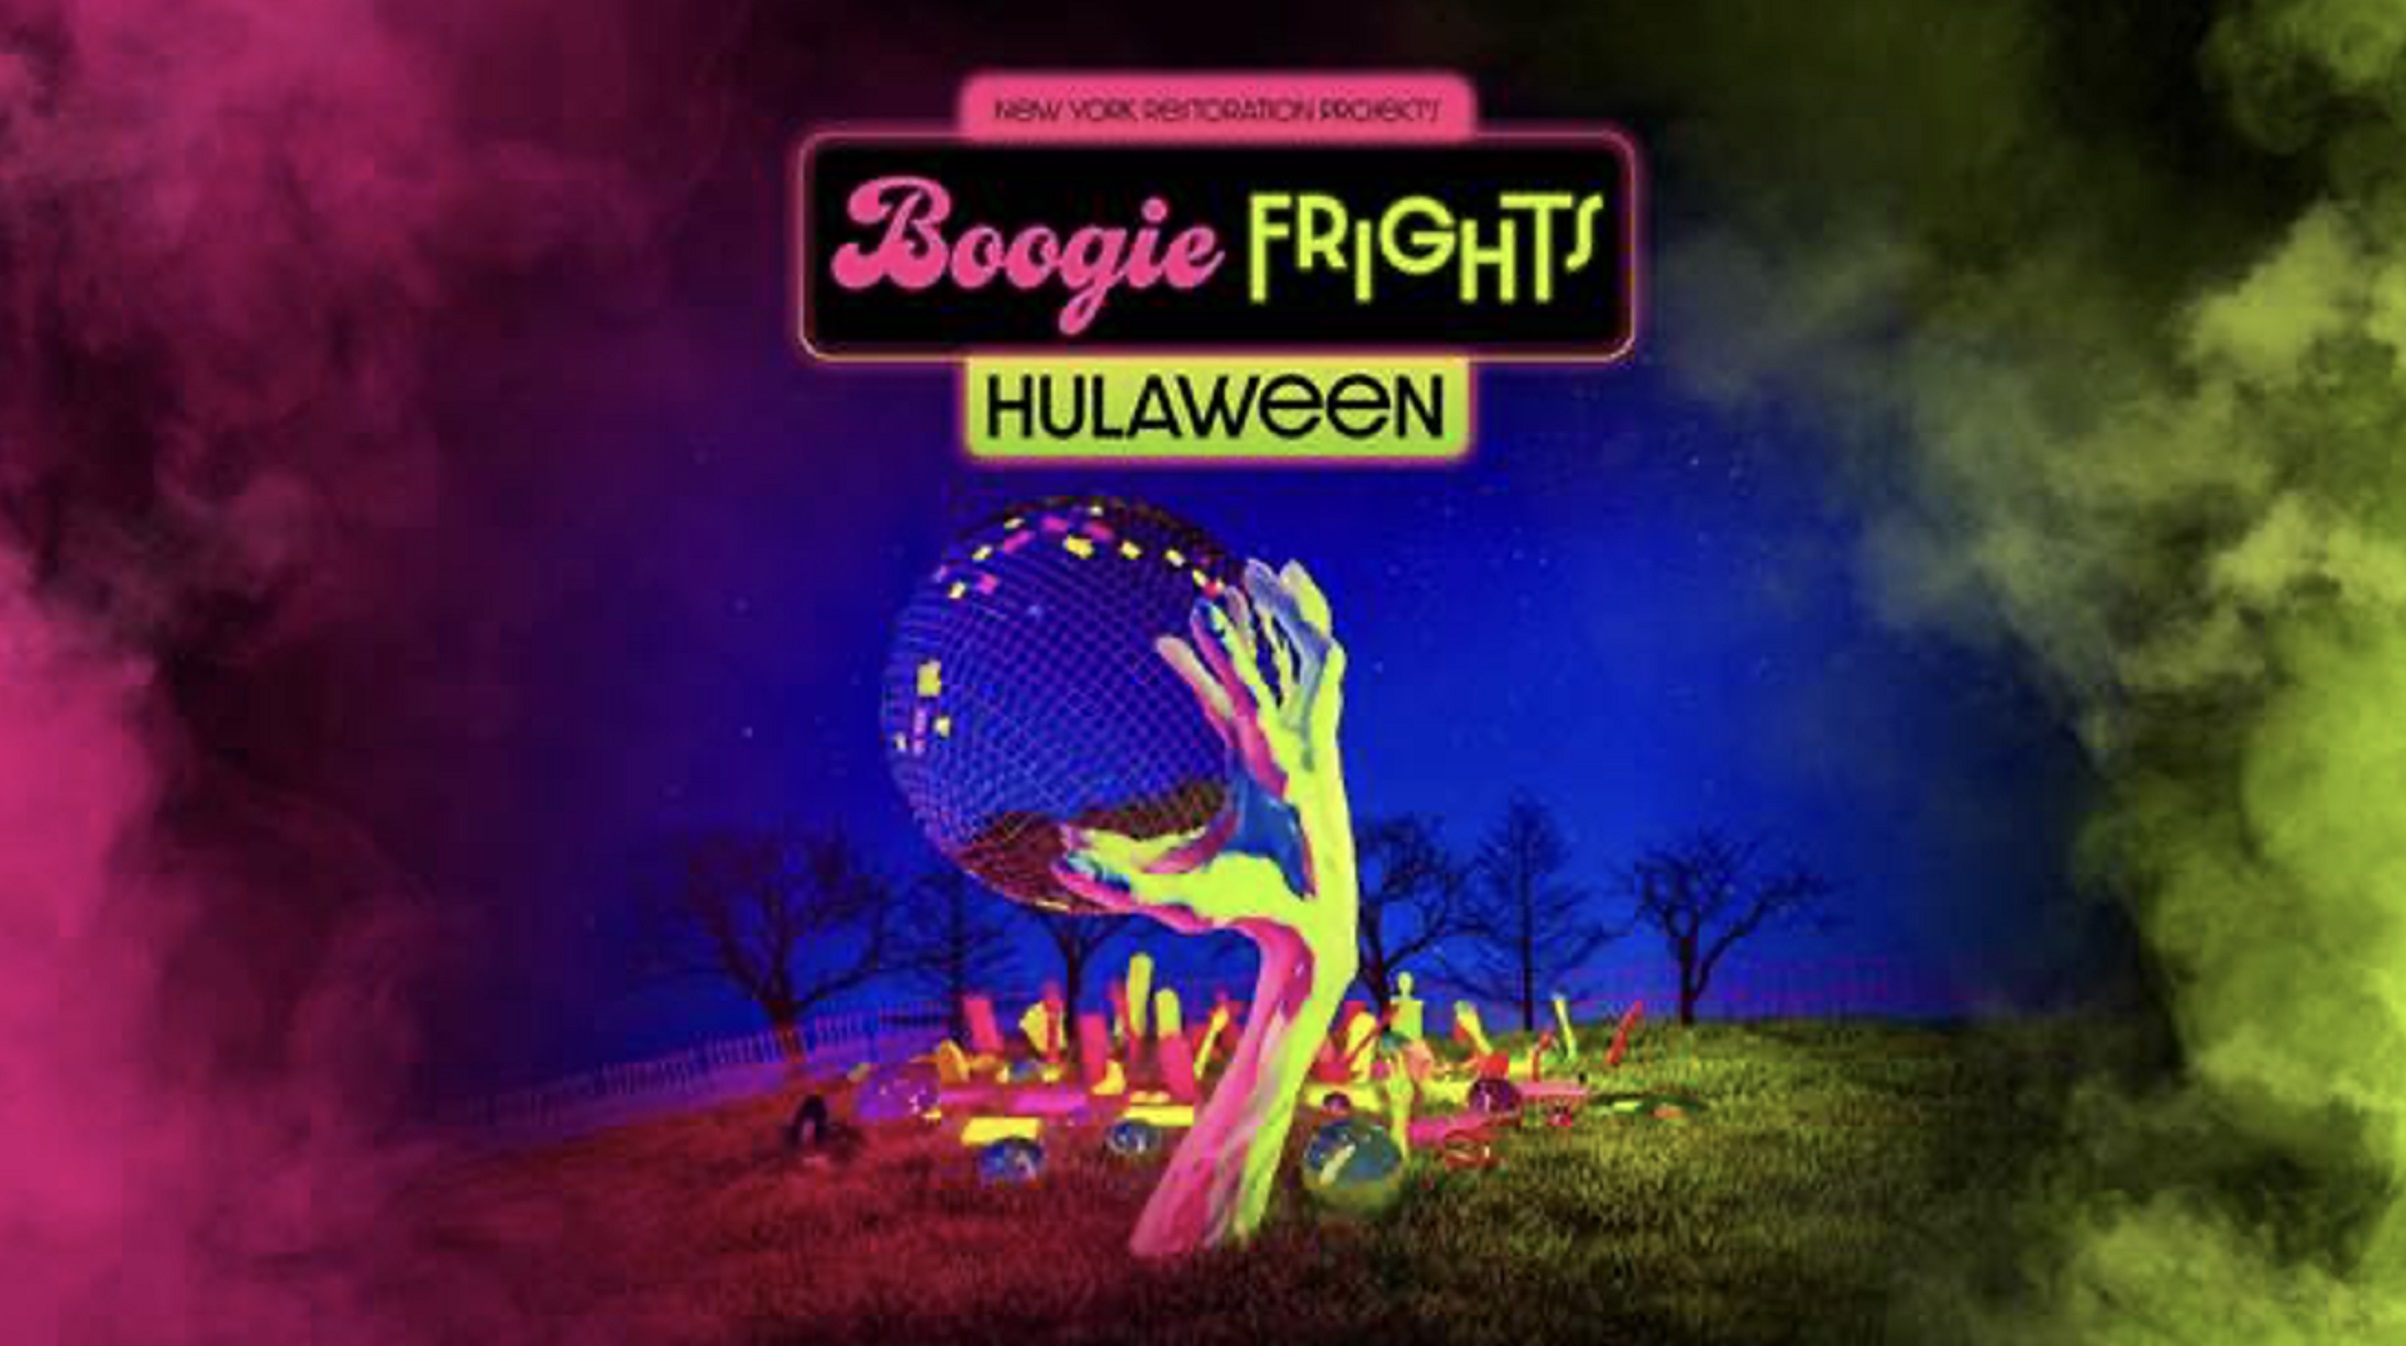 Bette Midler's New York Restoration Project To Host Boogie Frights Hulaween